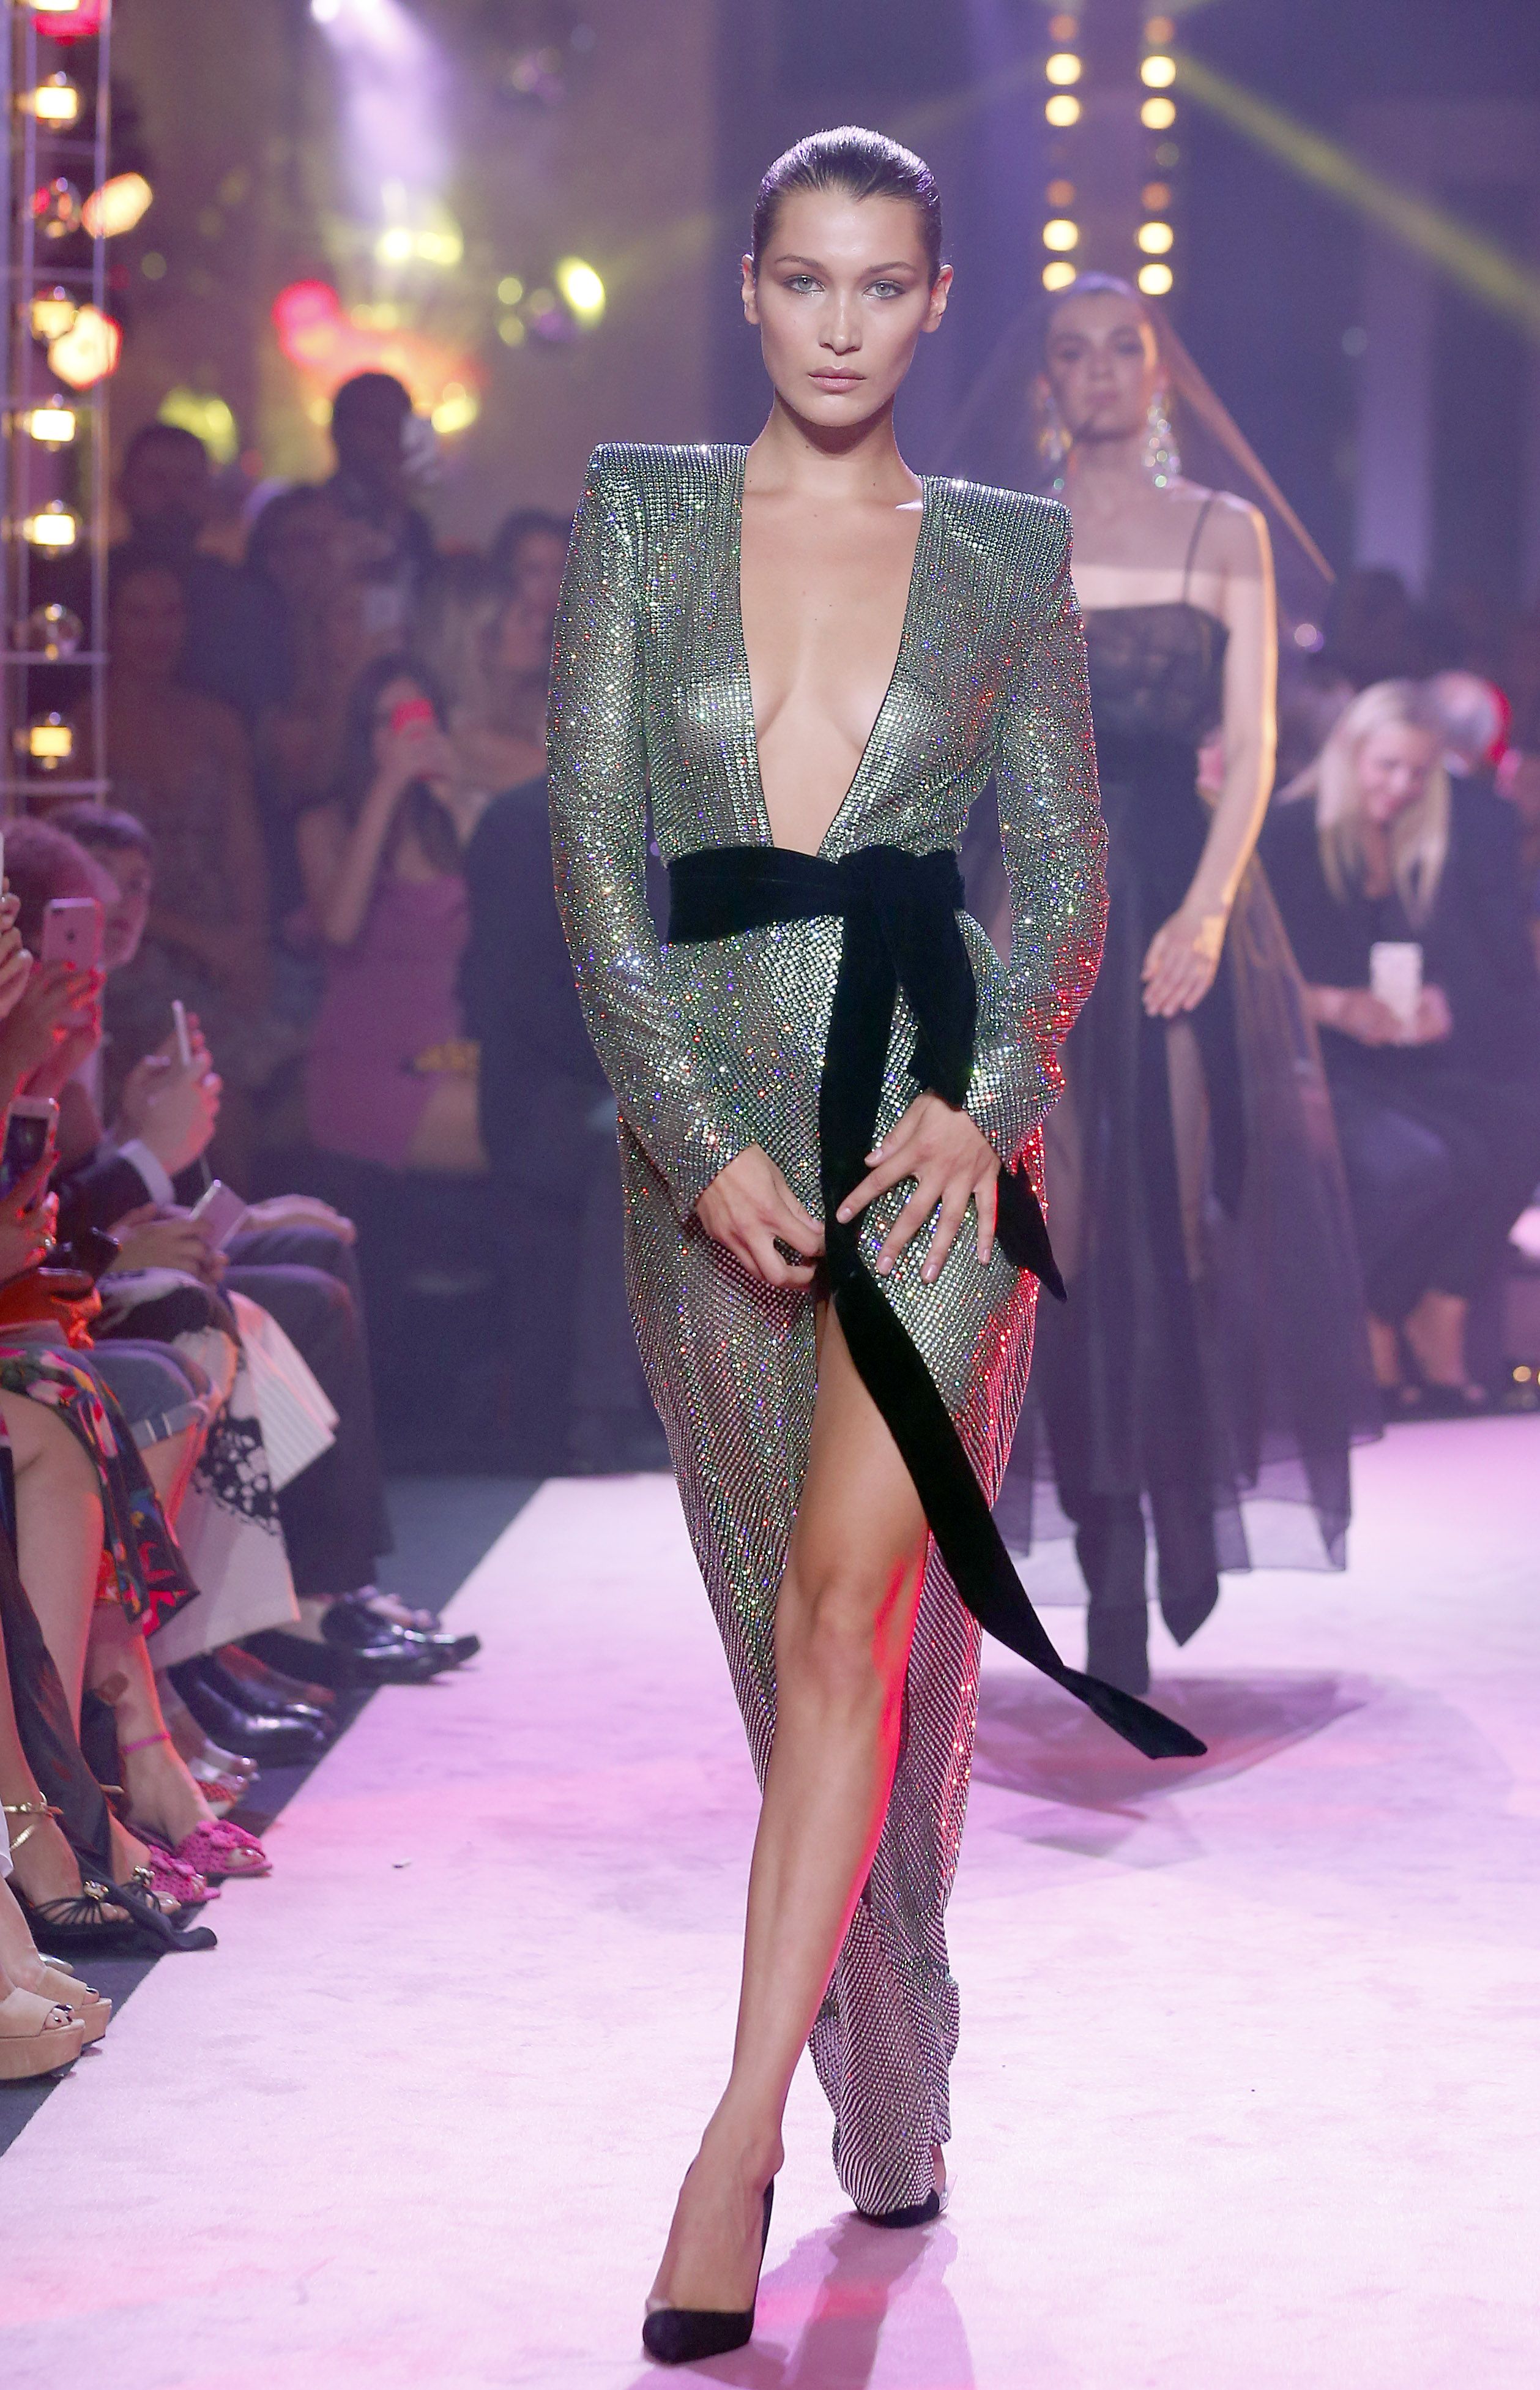 ashley behan recommends celebrity wardrobe malfunction tumblr pic